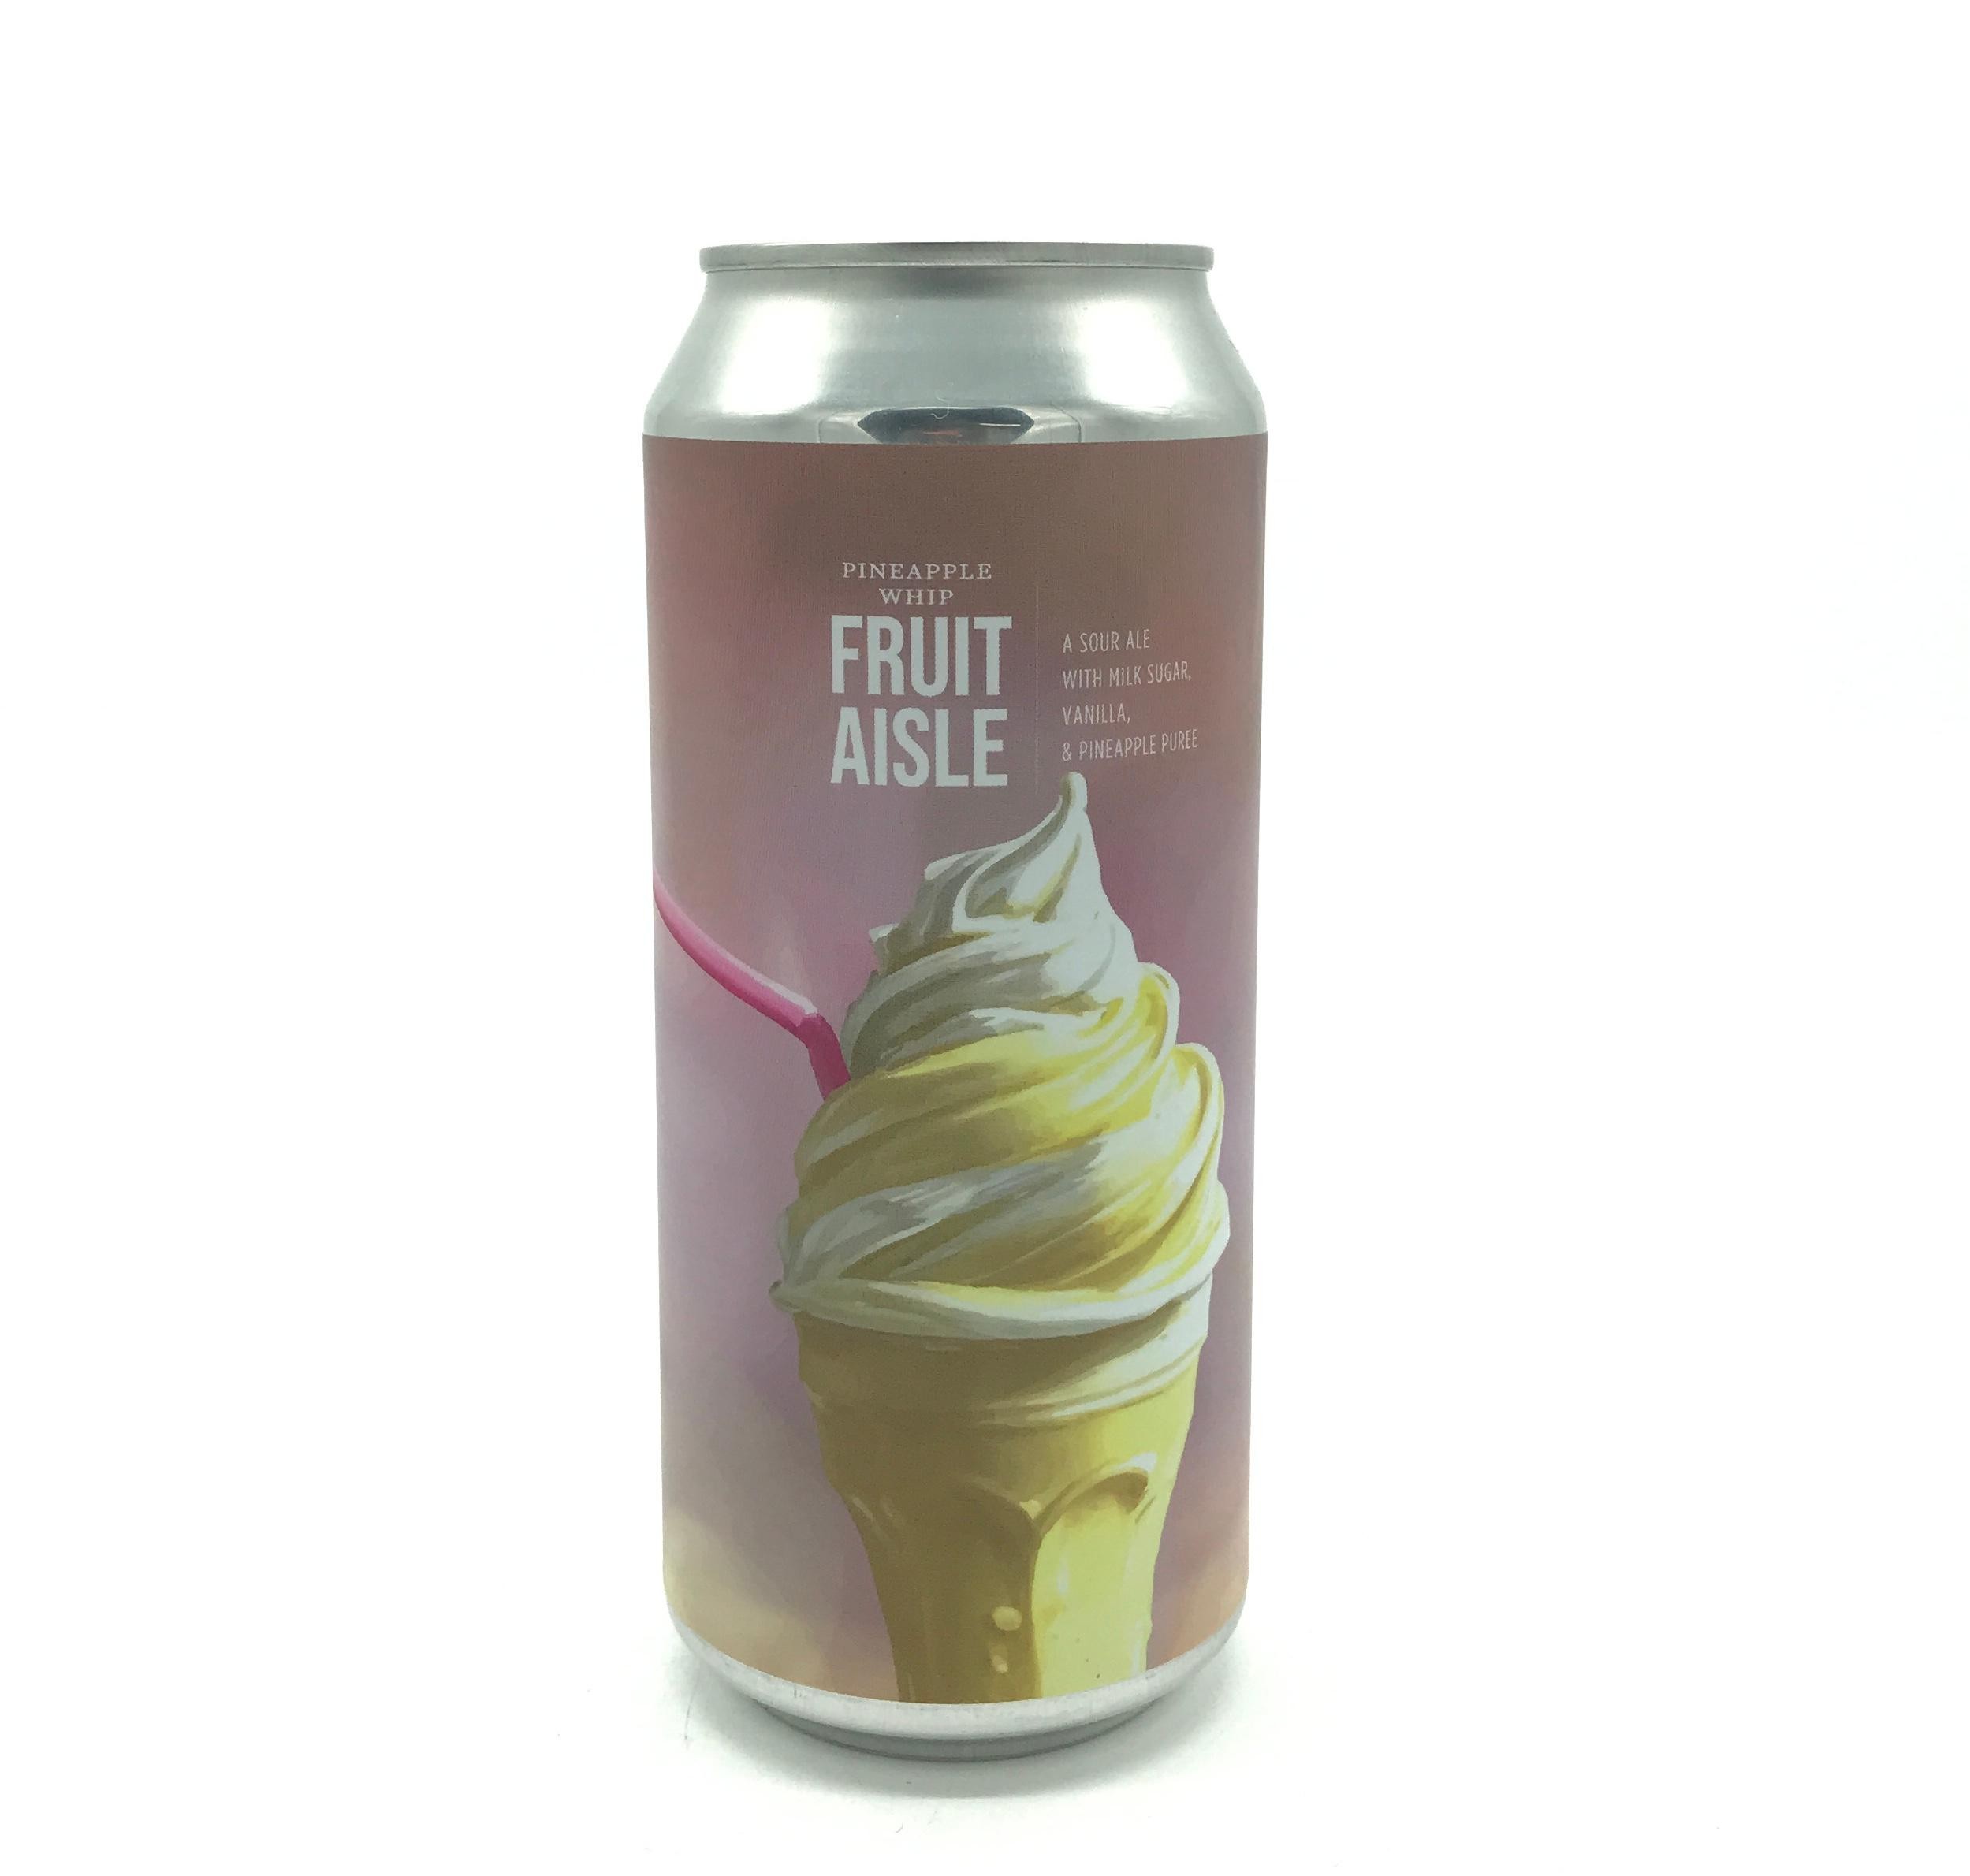 Triptych - Fruit Aisle: Pineapple Whip